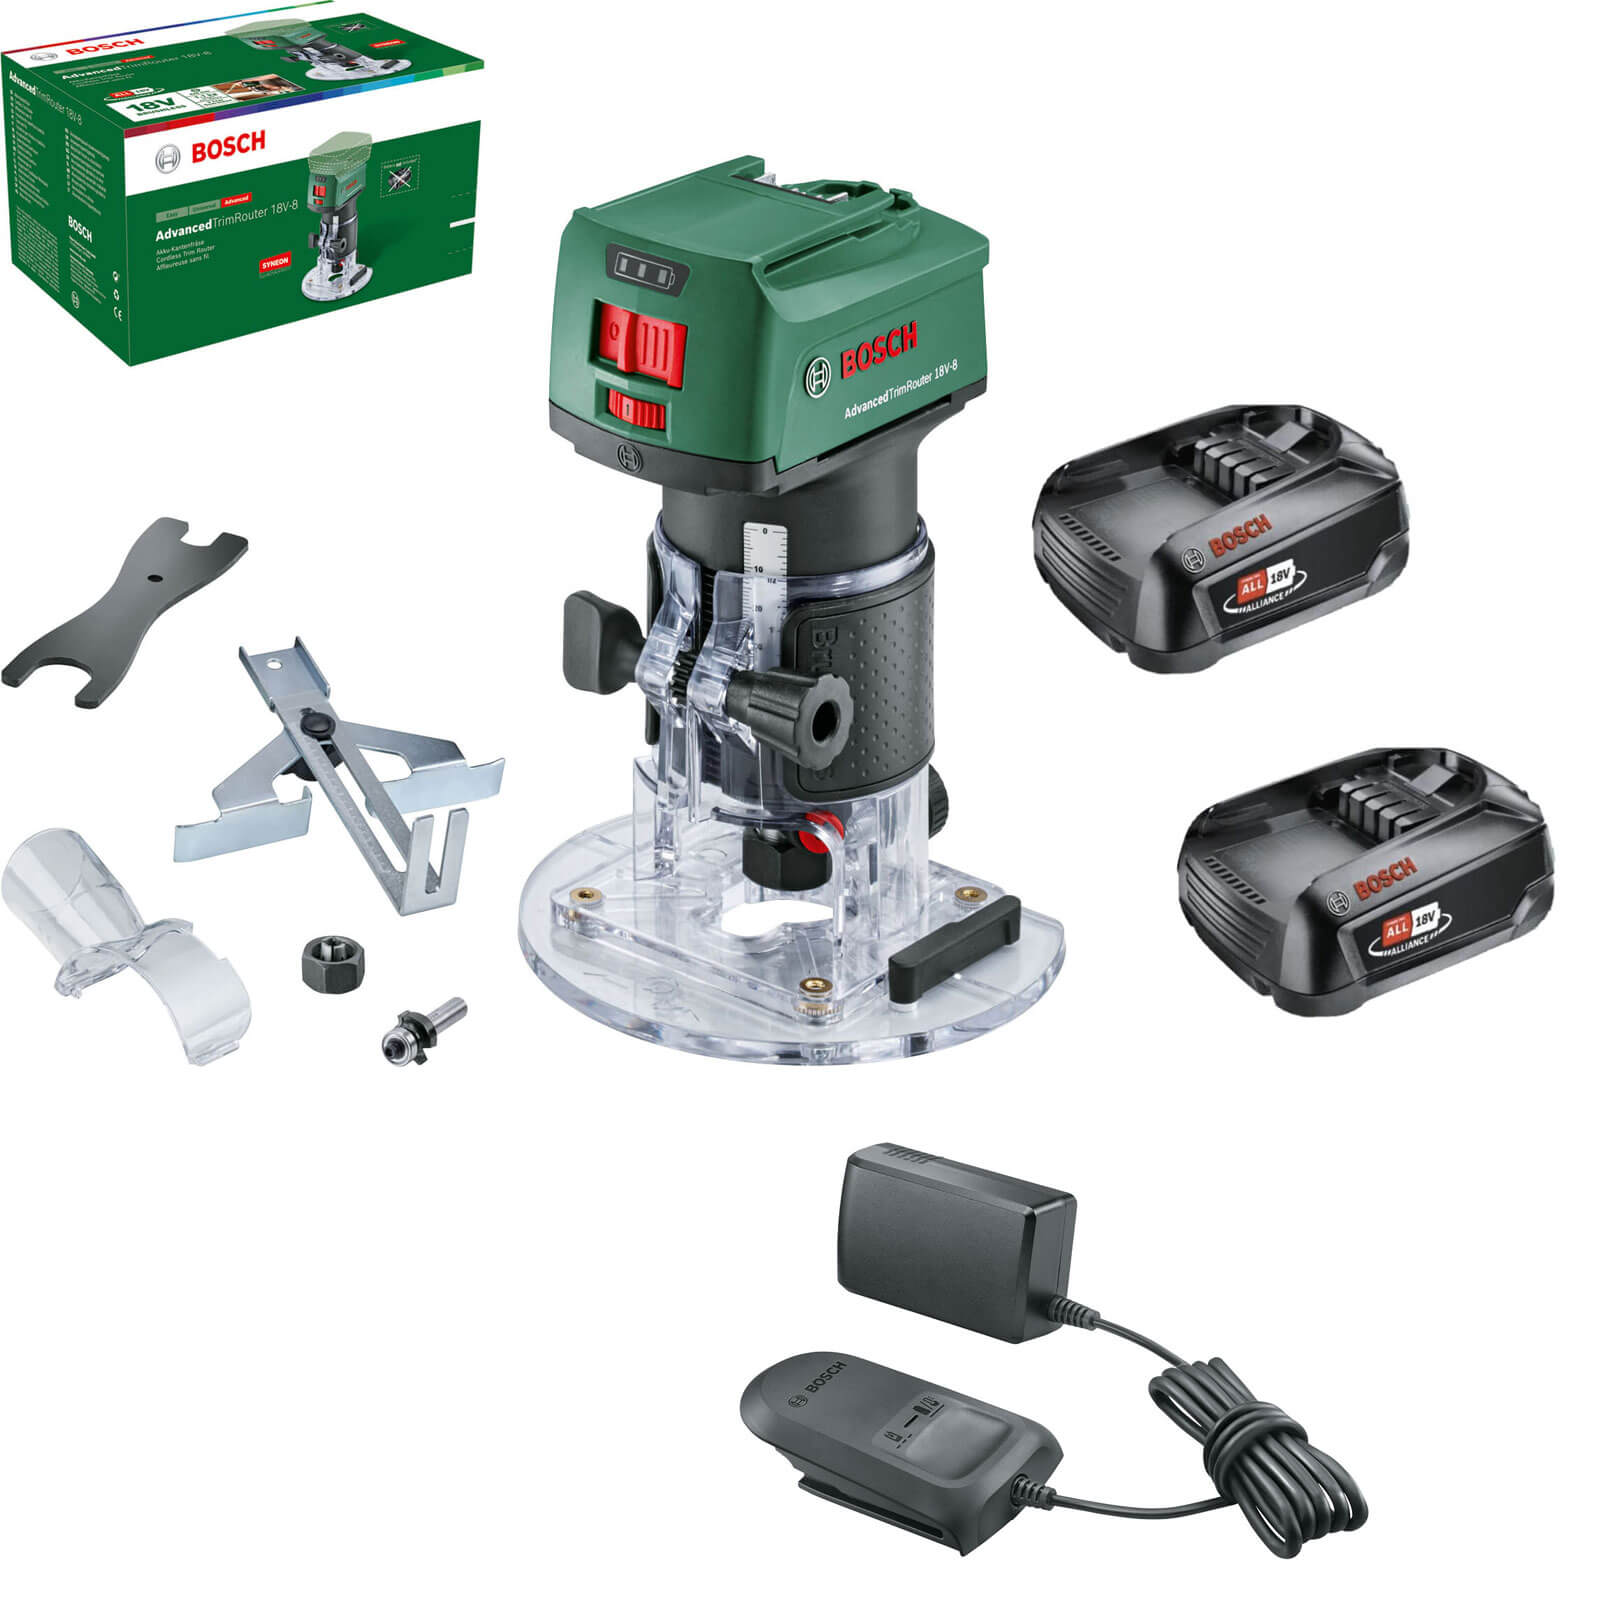 Bosch ADVANCEDTRIMROUTER 18V-8 P4A 18v Cordless Trim Router 2 x 1.5ah Li-ion Charger No Case FREE UK 1/4" Collet Worth £11.95 Extra !